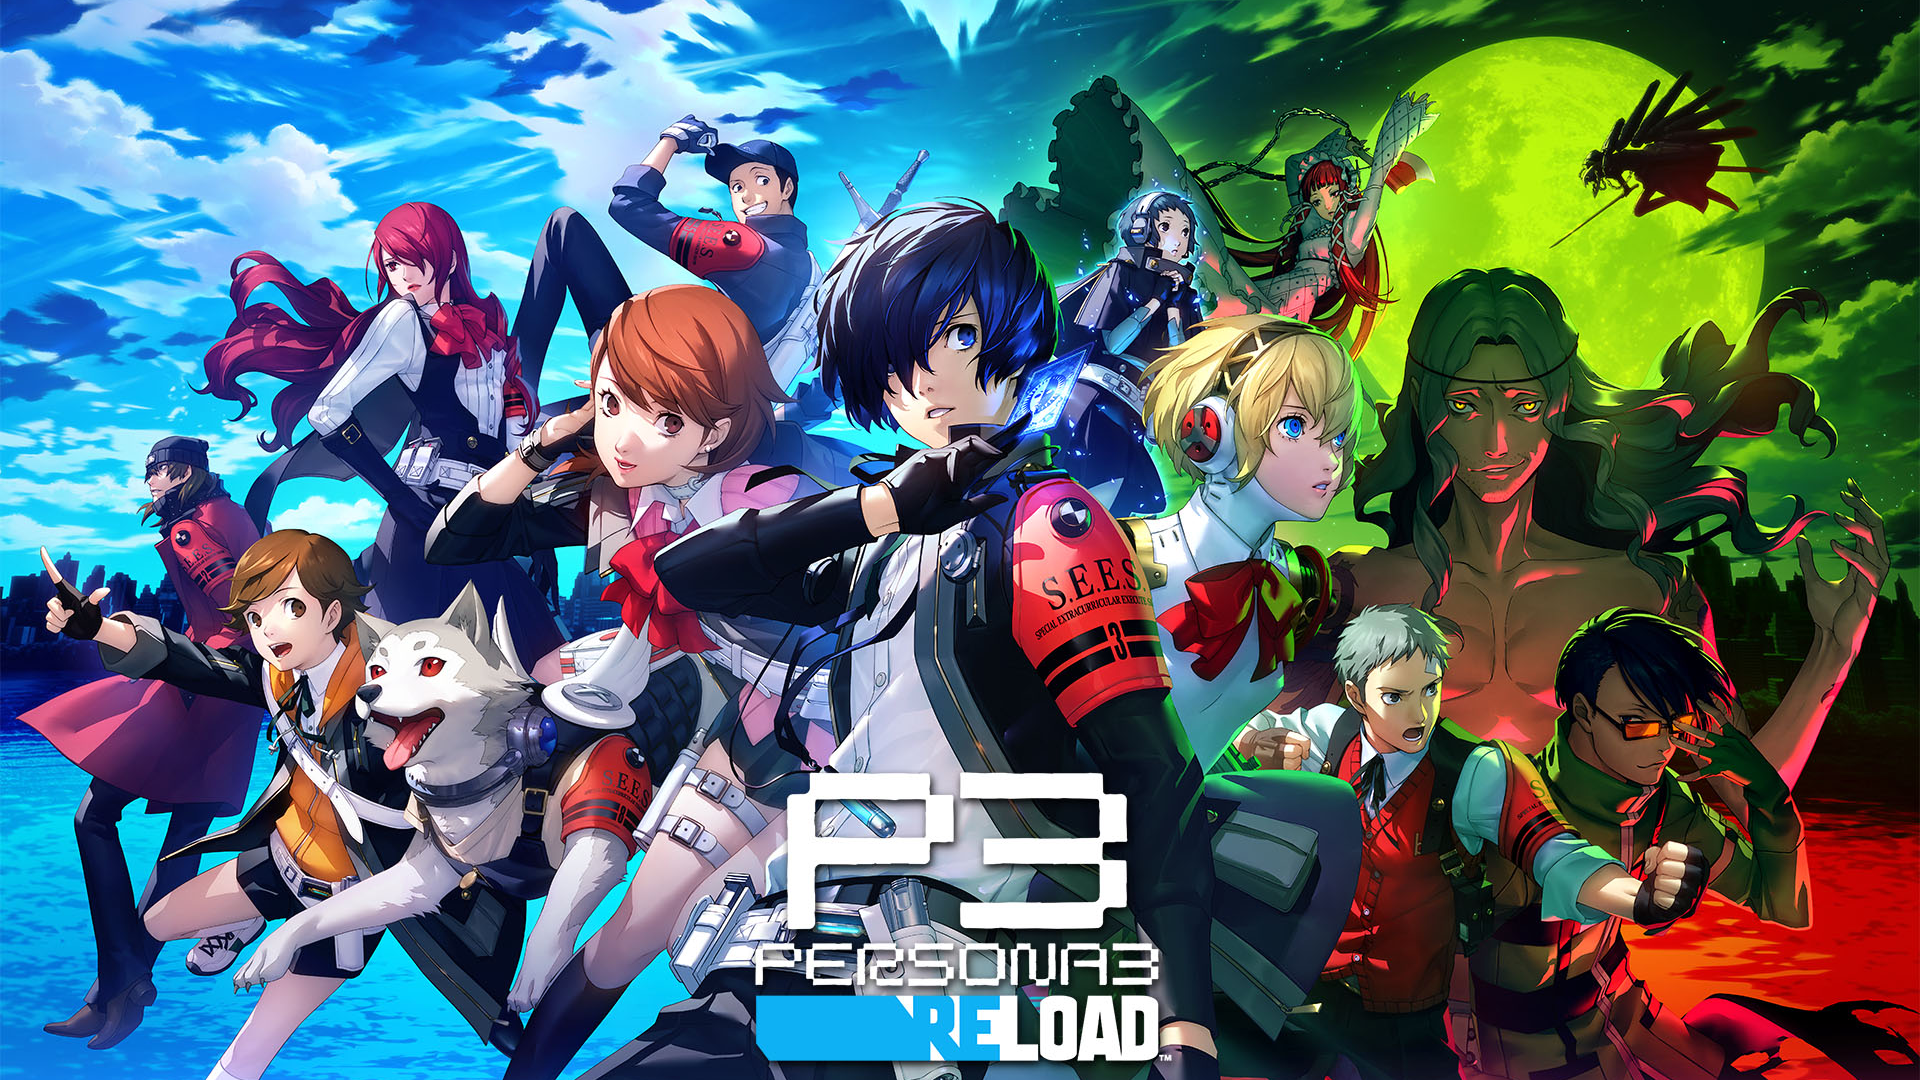 Persona 3 Reload Reveals New Key Art Featuring SEES and Strega